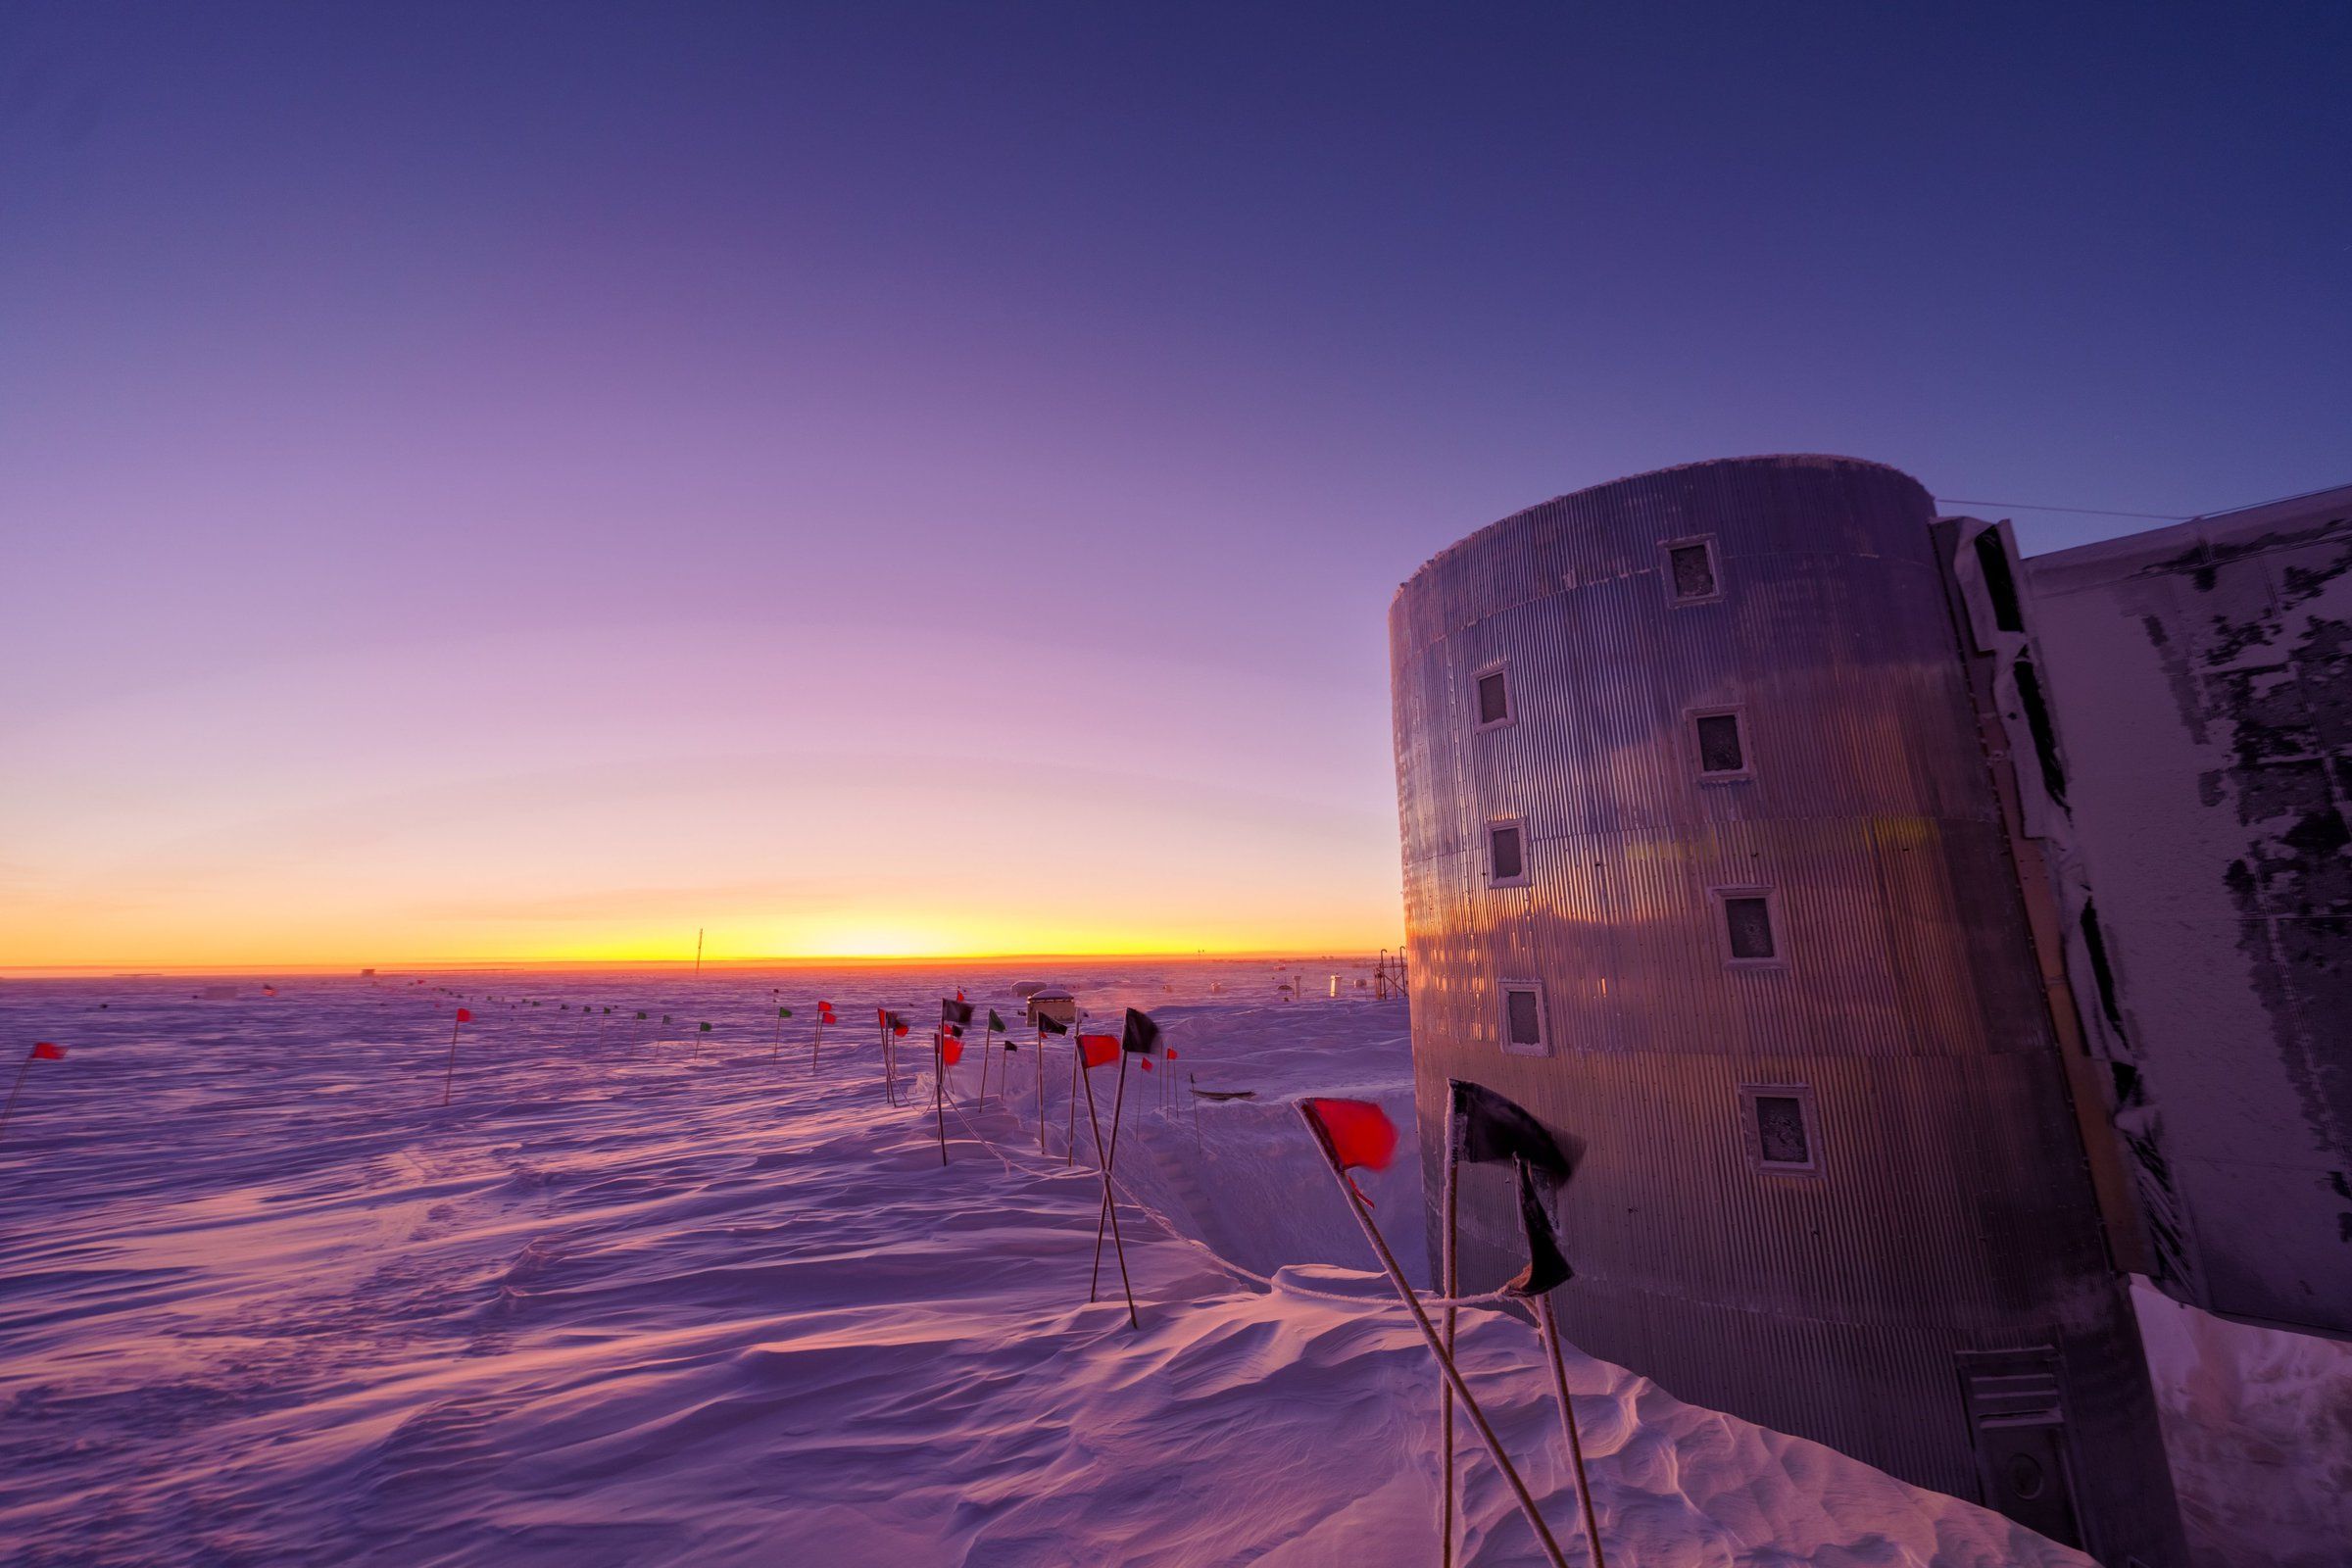 South Pole posts most severe cold season on record, an anomaly in 